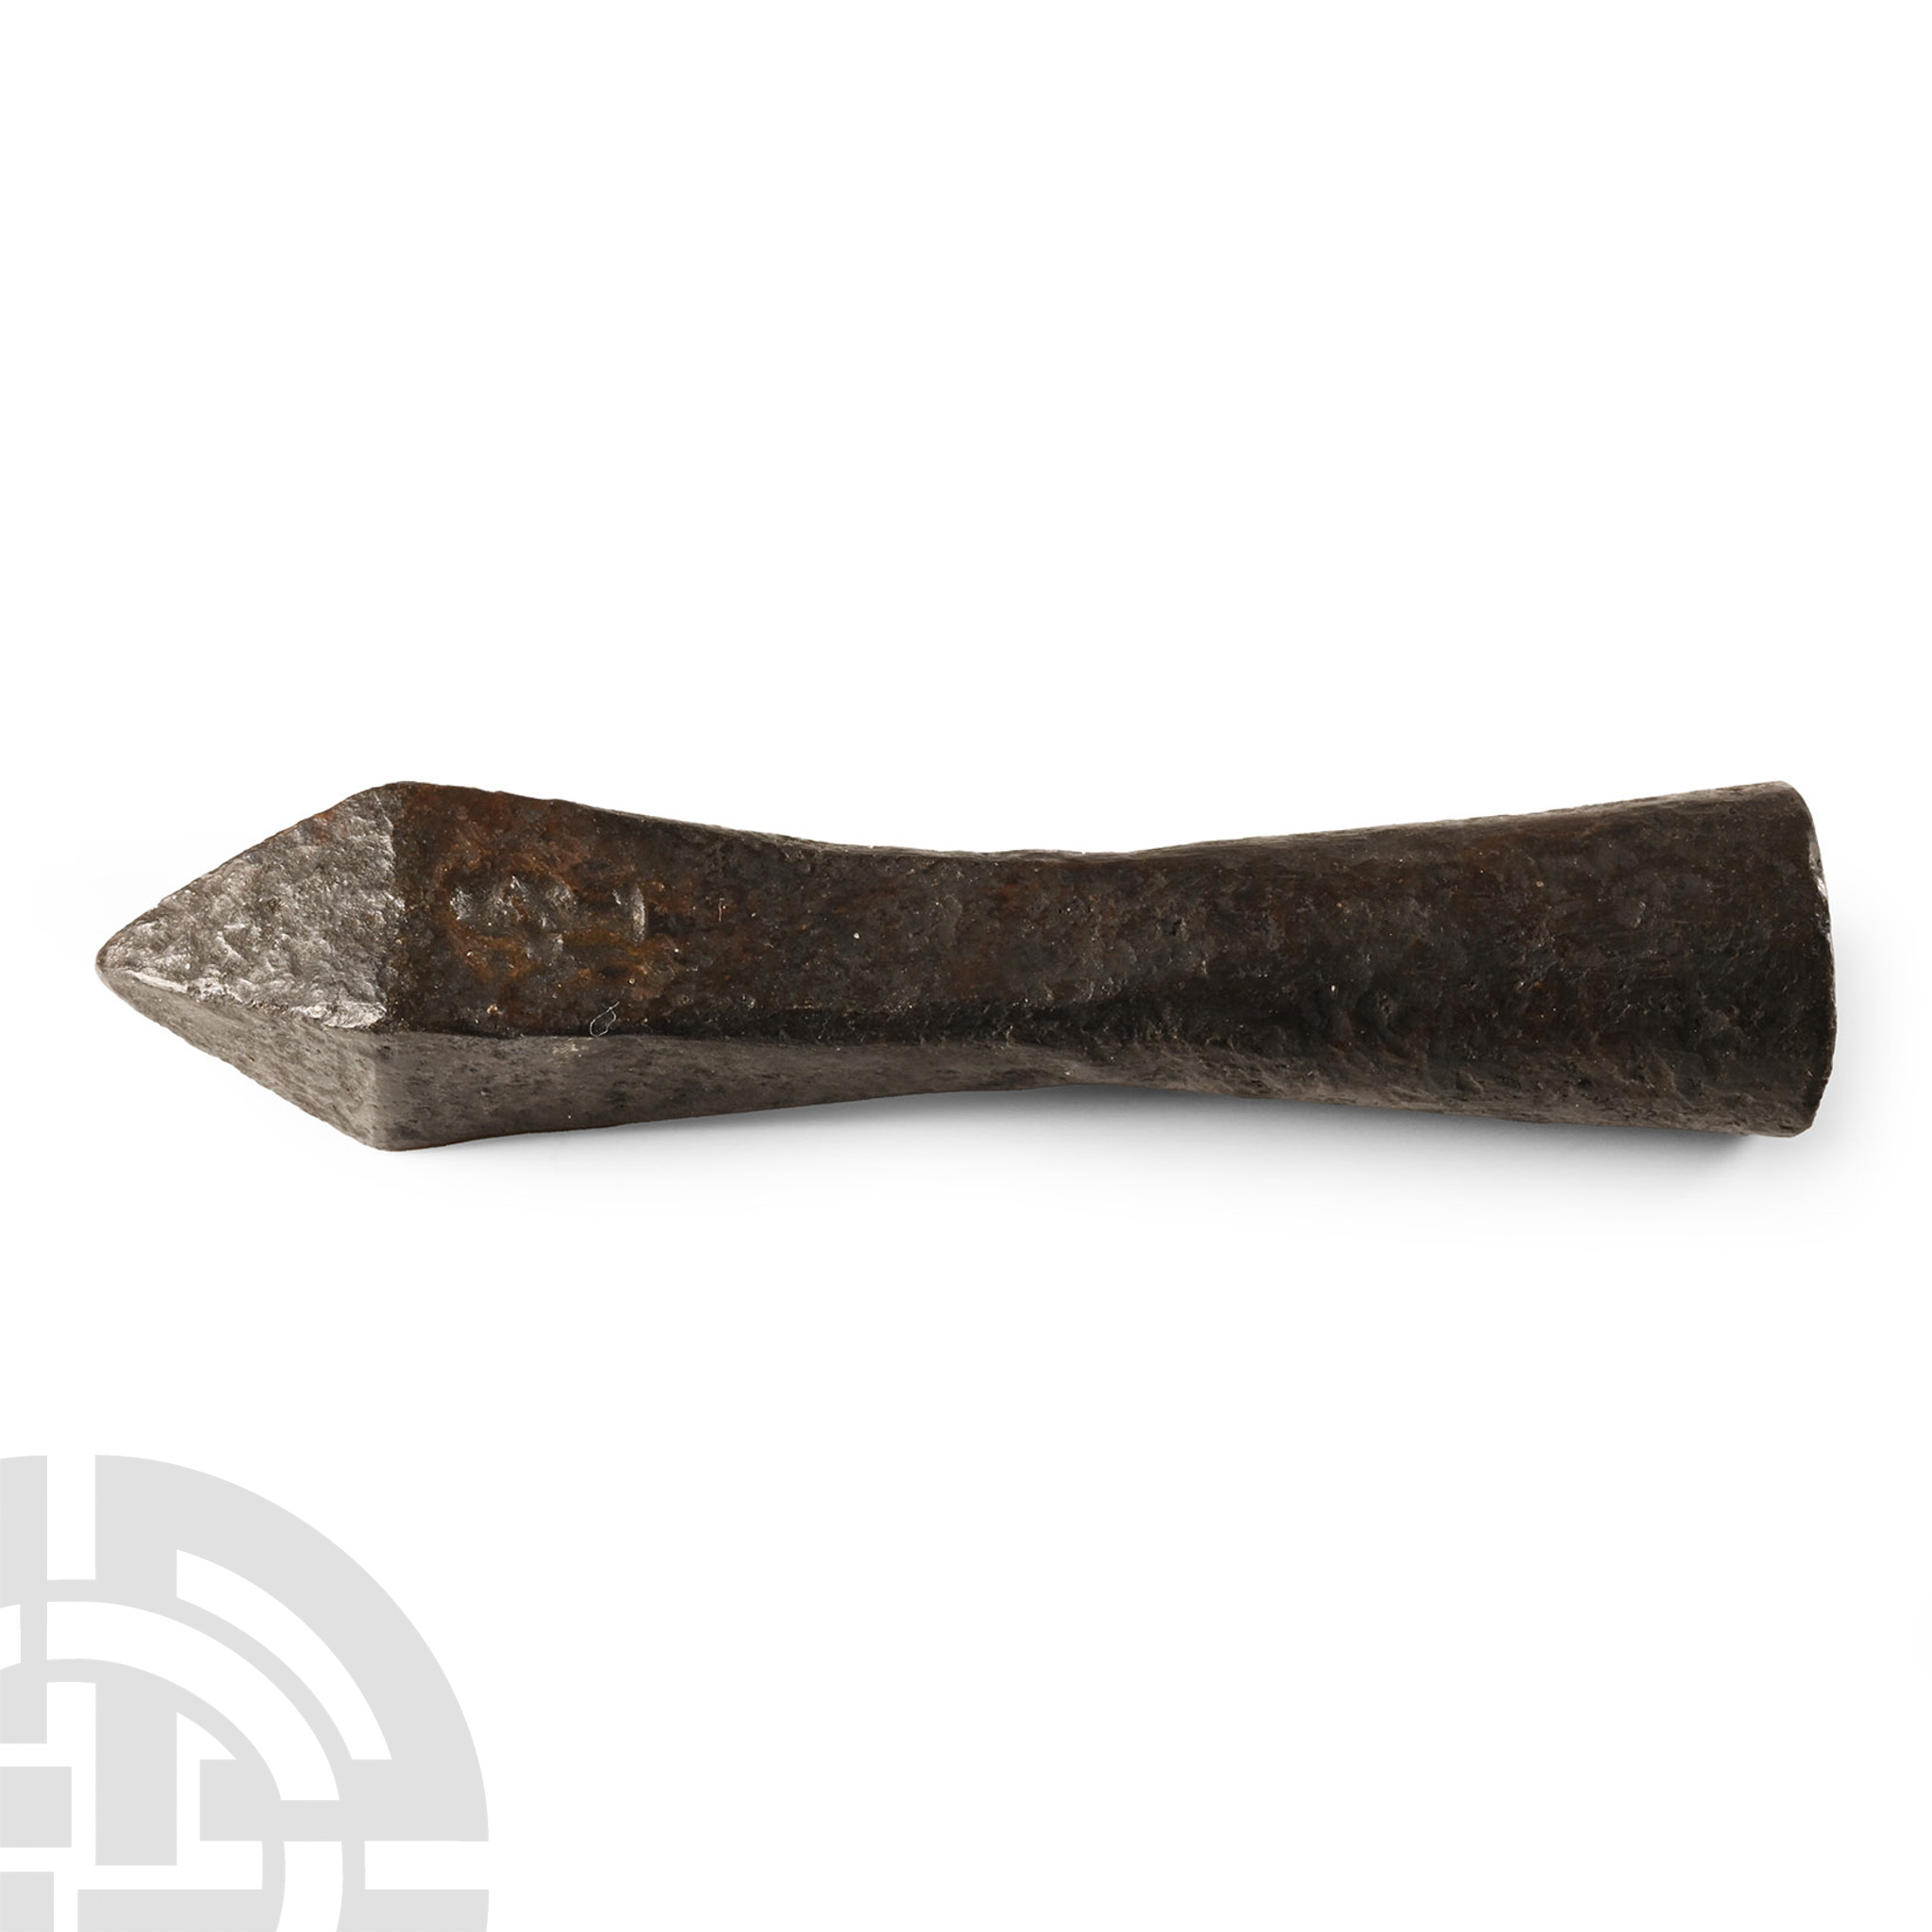 Medieval Socketted Iron Crossbow Bolt Head with Amphora Maker's Mark